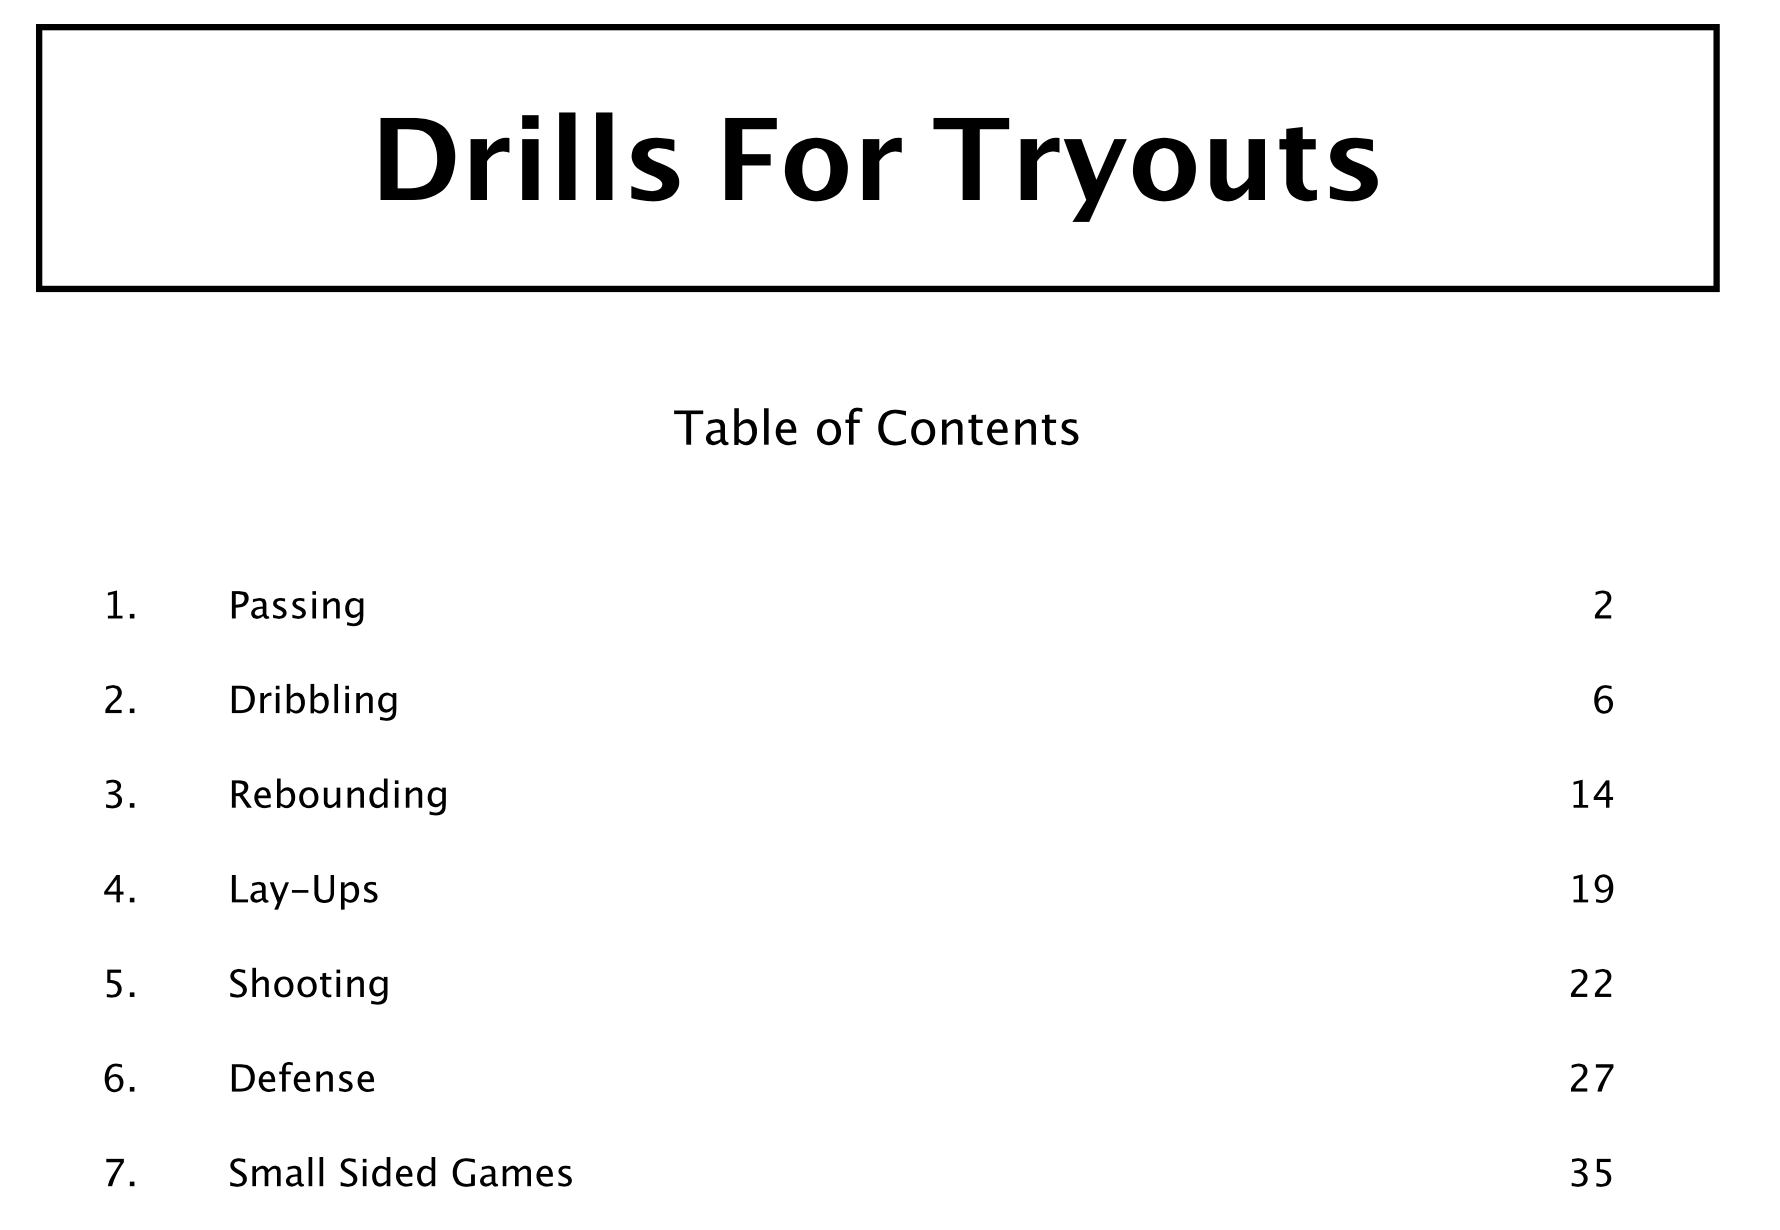 Drills for Tryouts